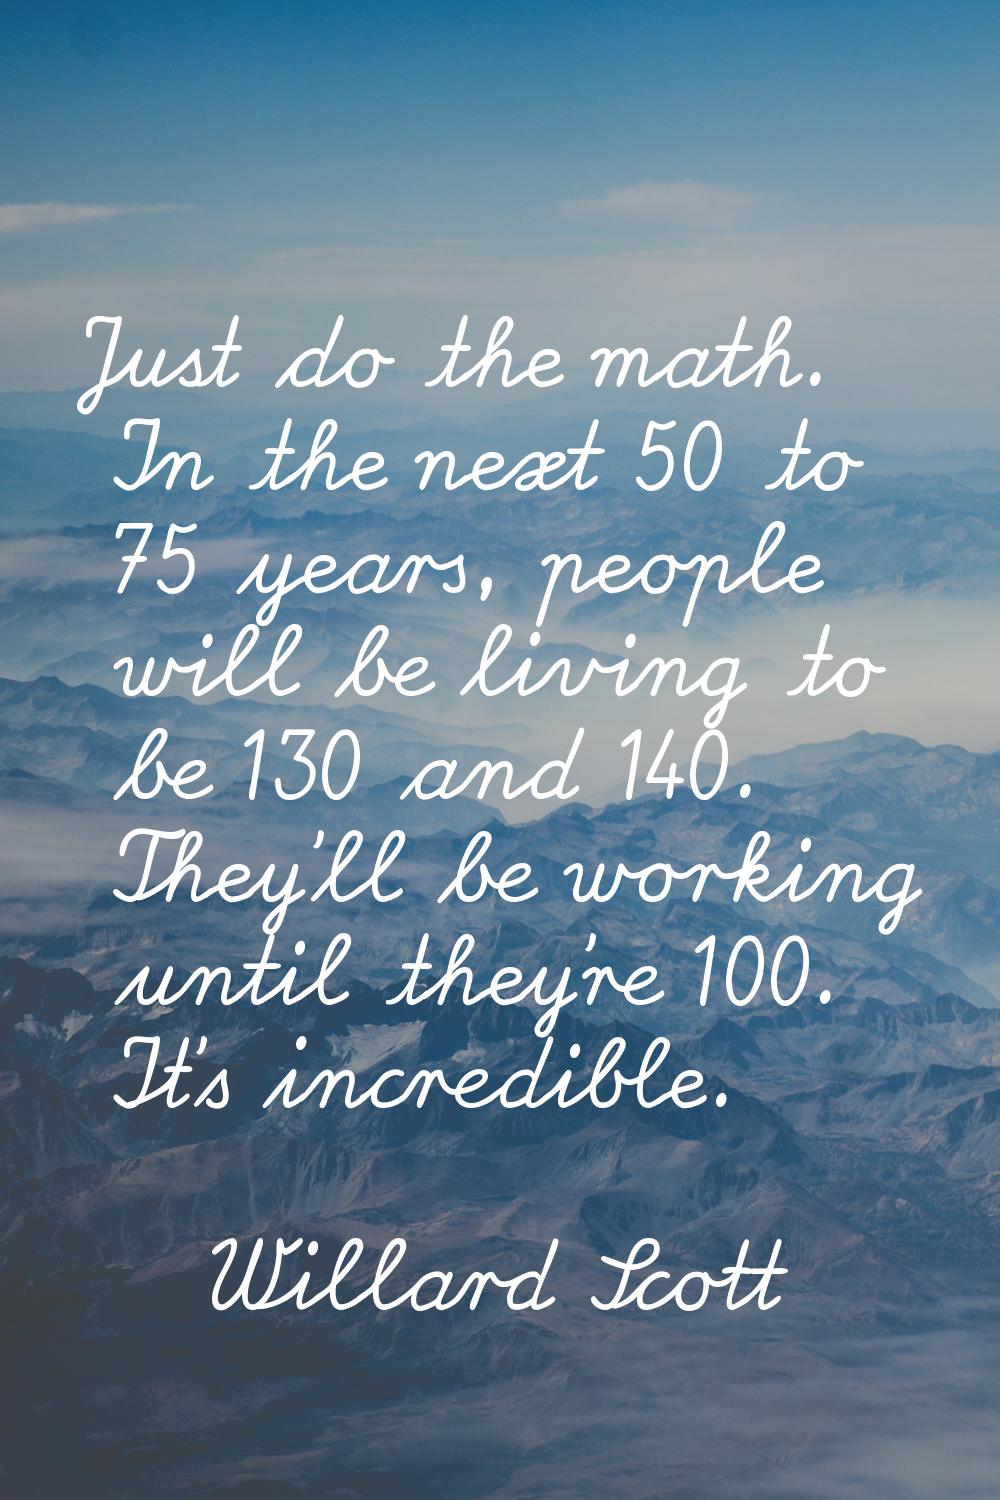 Just do the math. In the next 50 to 75 years, people will be living to be 130 and 140. They'll be w